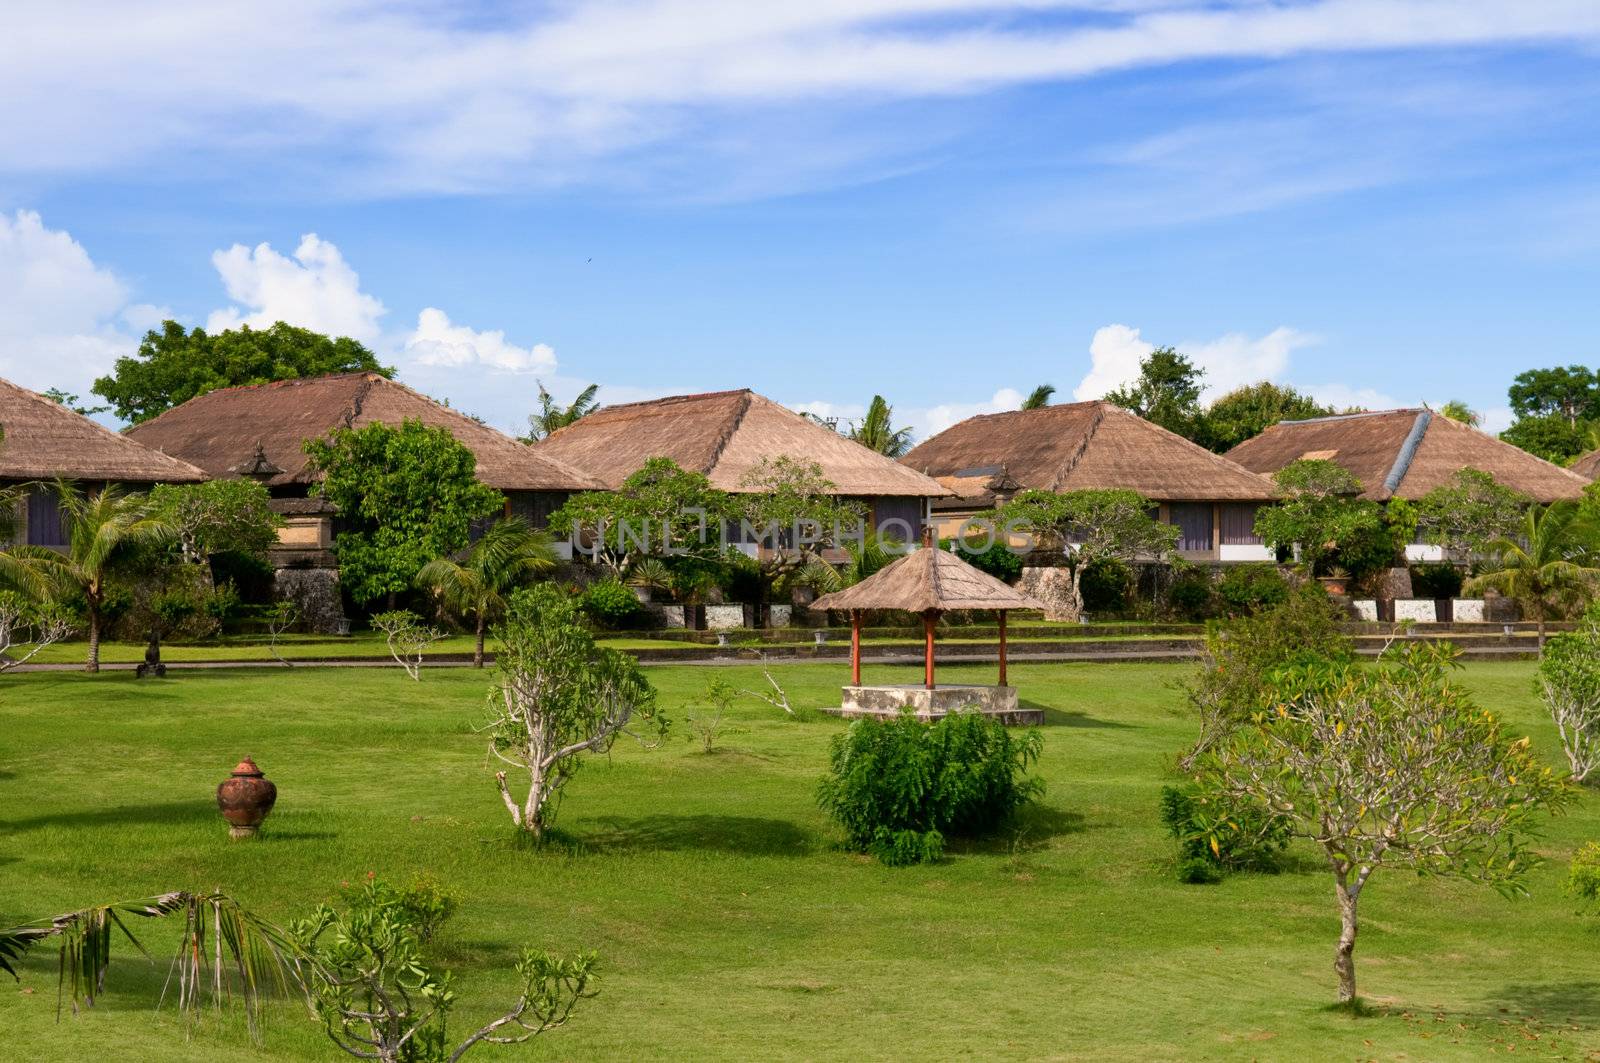 Villas and hut in green field of India